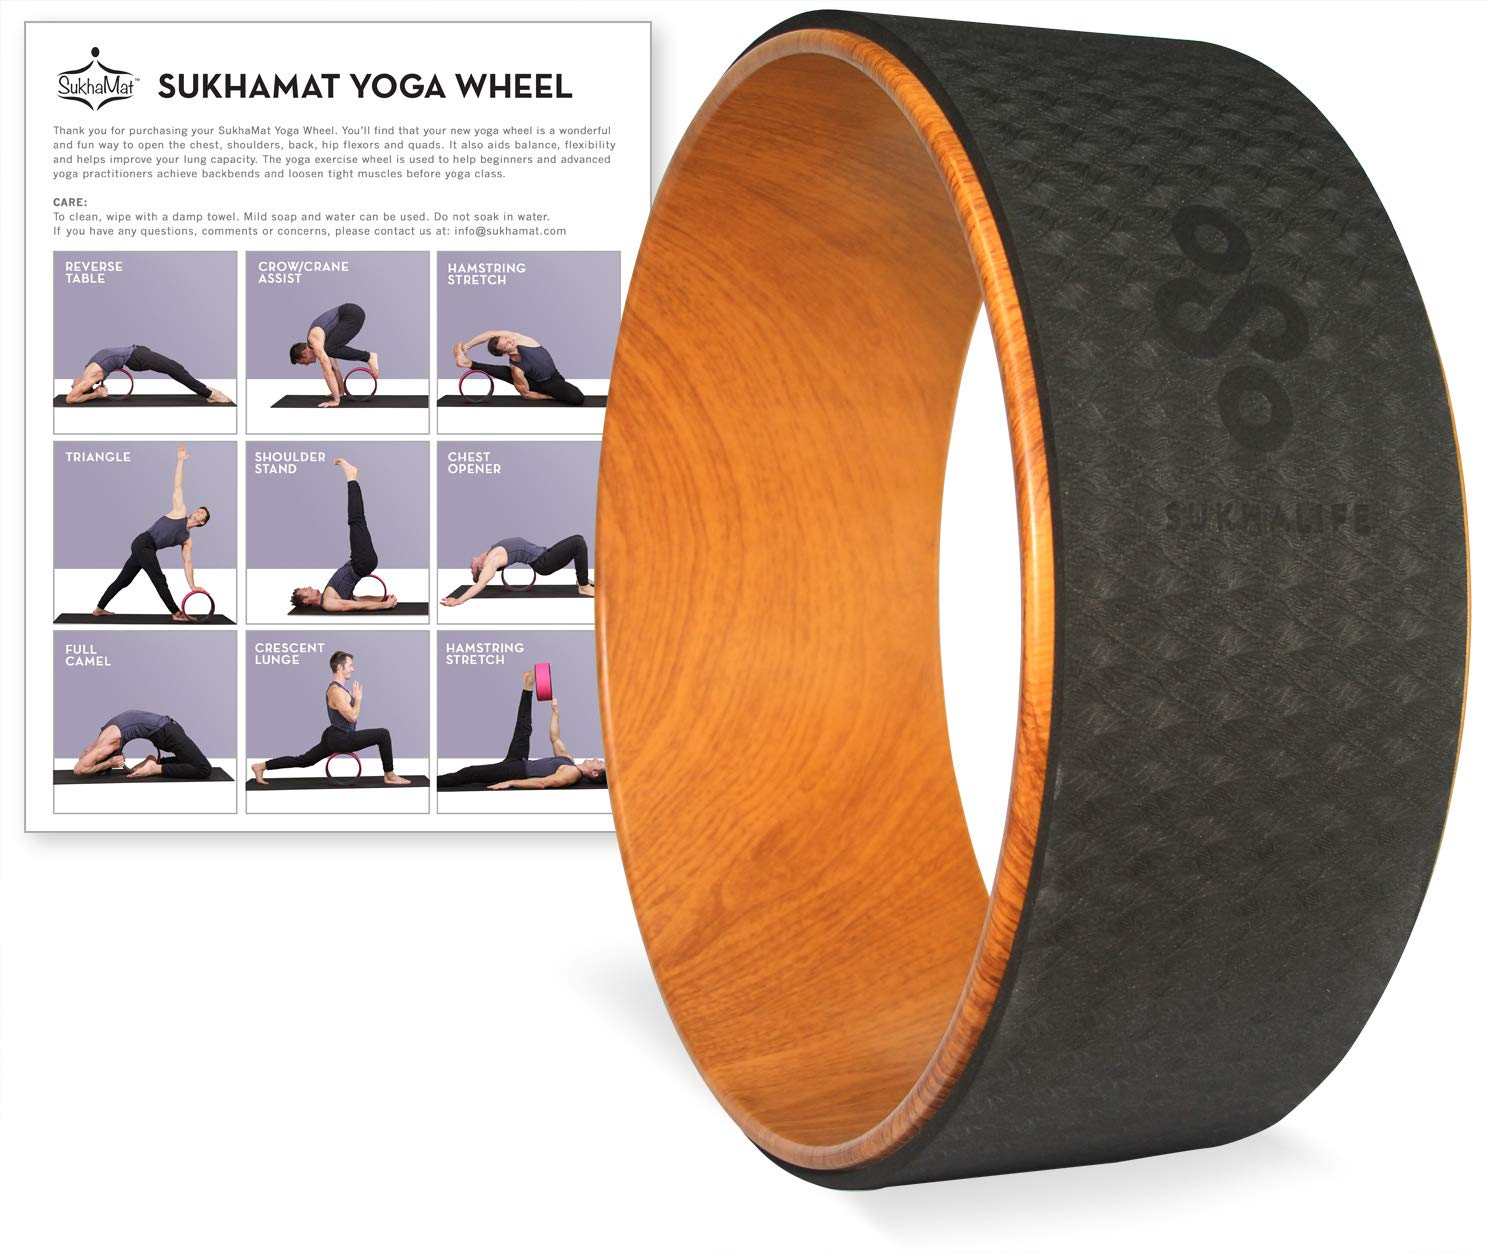 SukhaMat Yoga Wheel - Pro - 12.5 x 5 Yoga Prop Wheel for Deeper Poses,  Relieve Back Pain, Stretching, New! Online Video Yoga Wheel Classes &  Printed Guide WoodGrain/Black